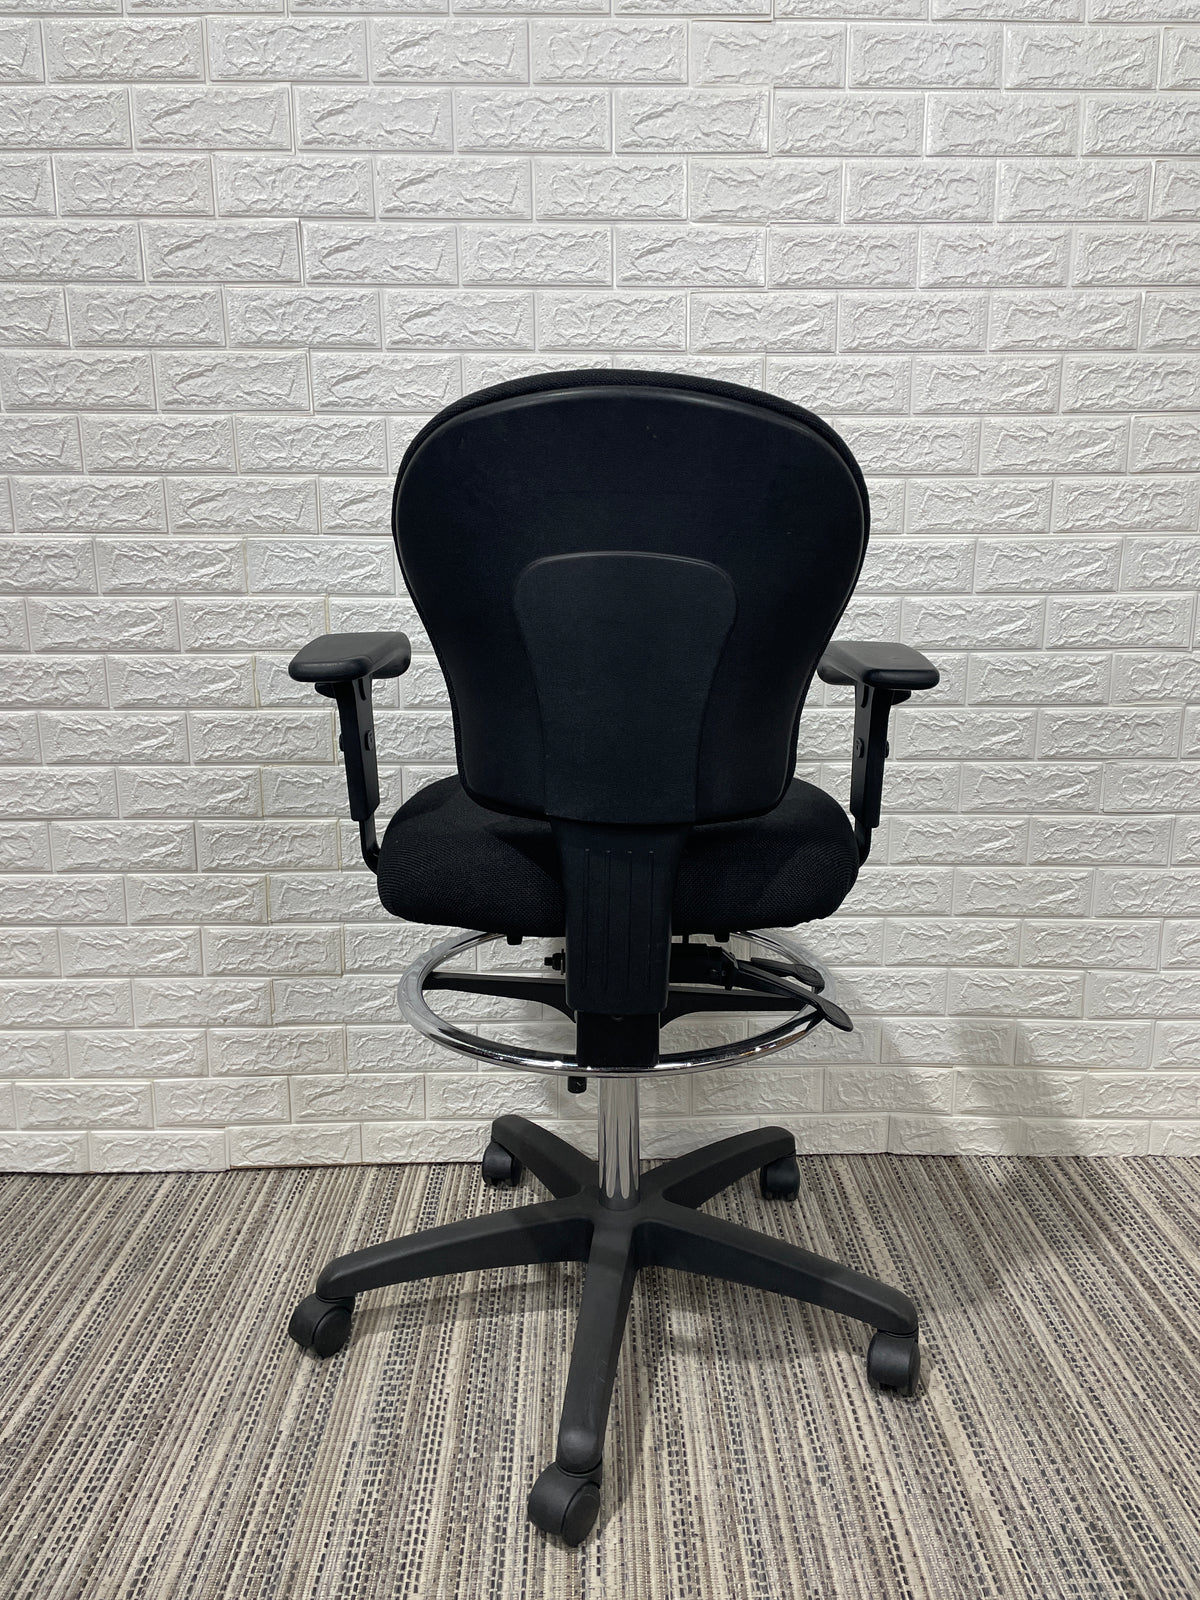 Pre-Owned Black Task Stool - Duckys Office Furniture